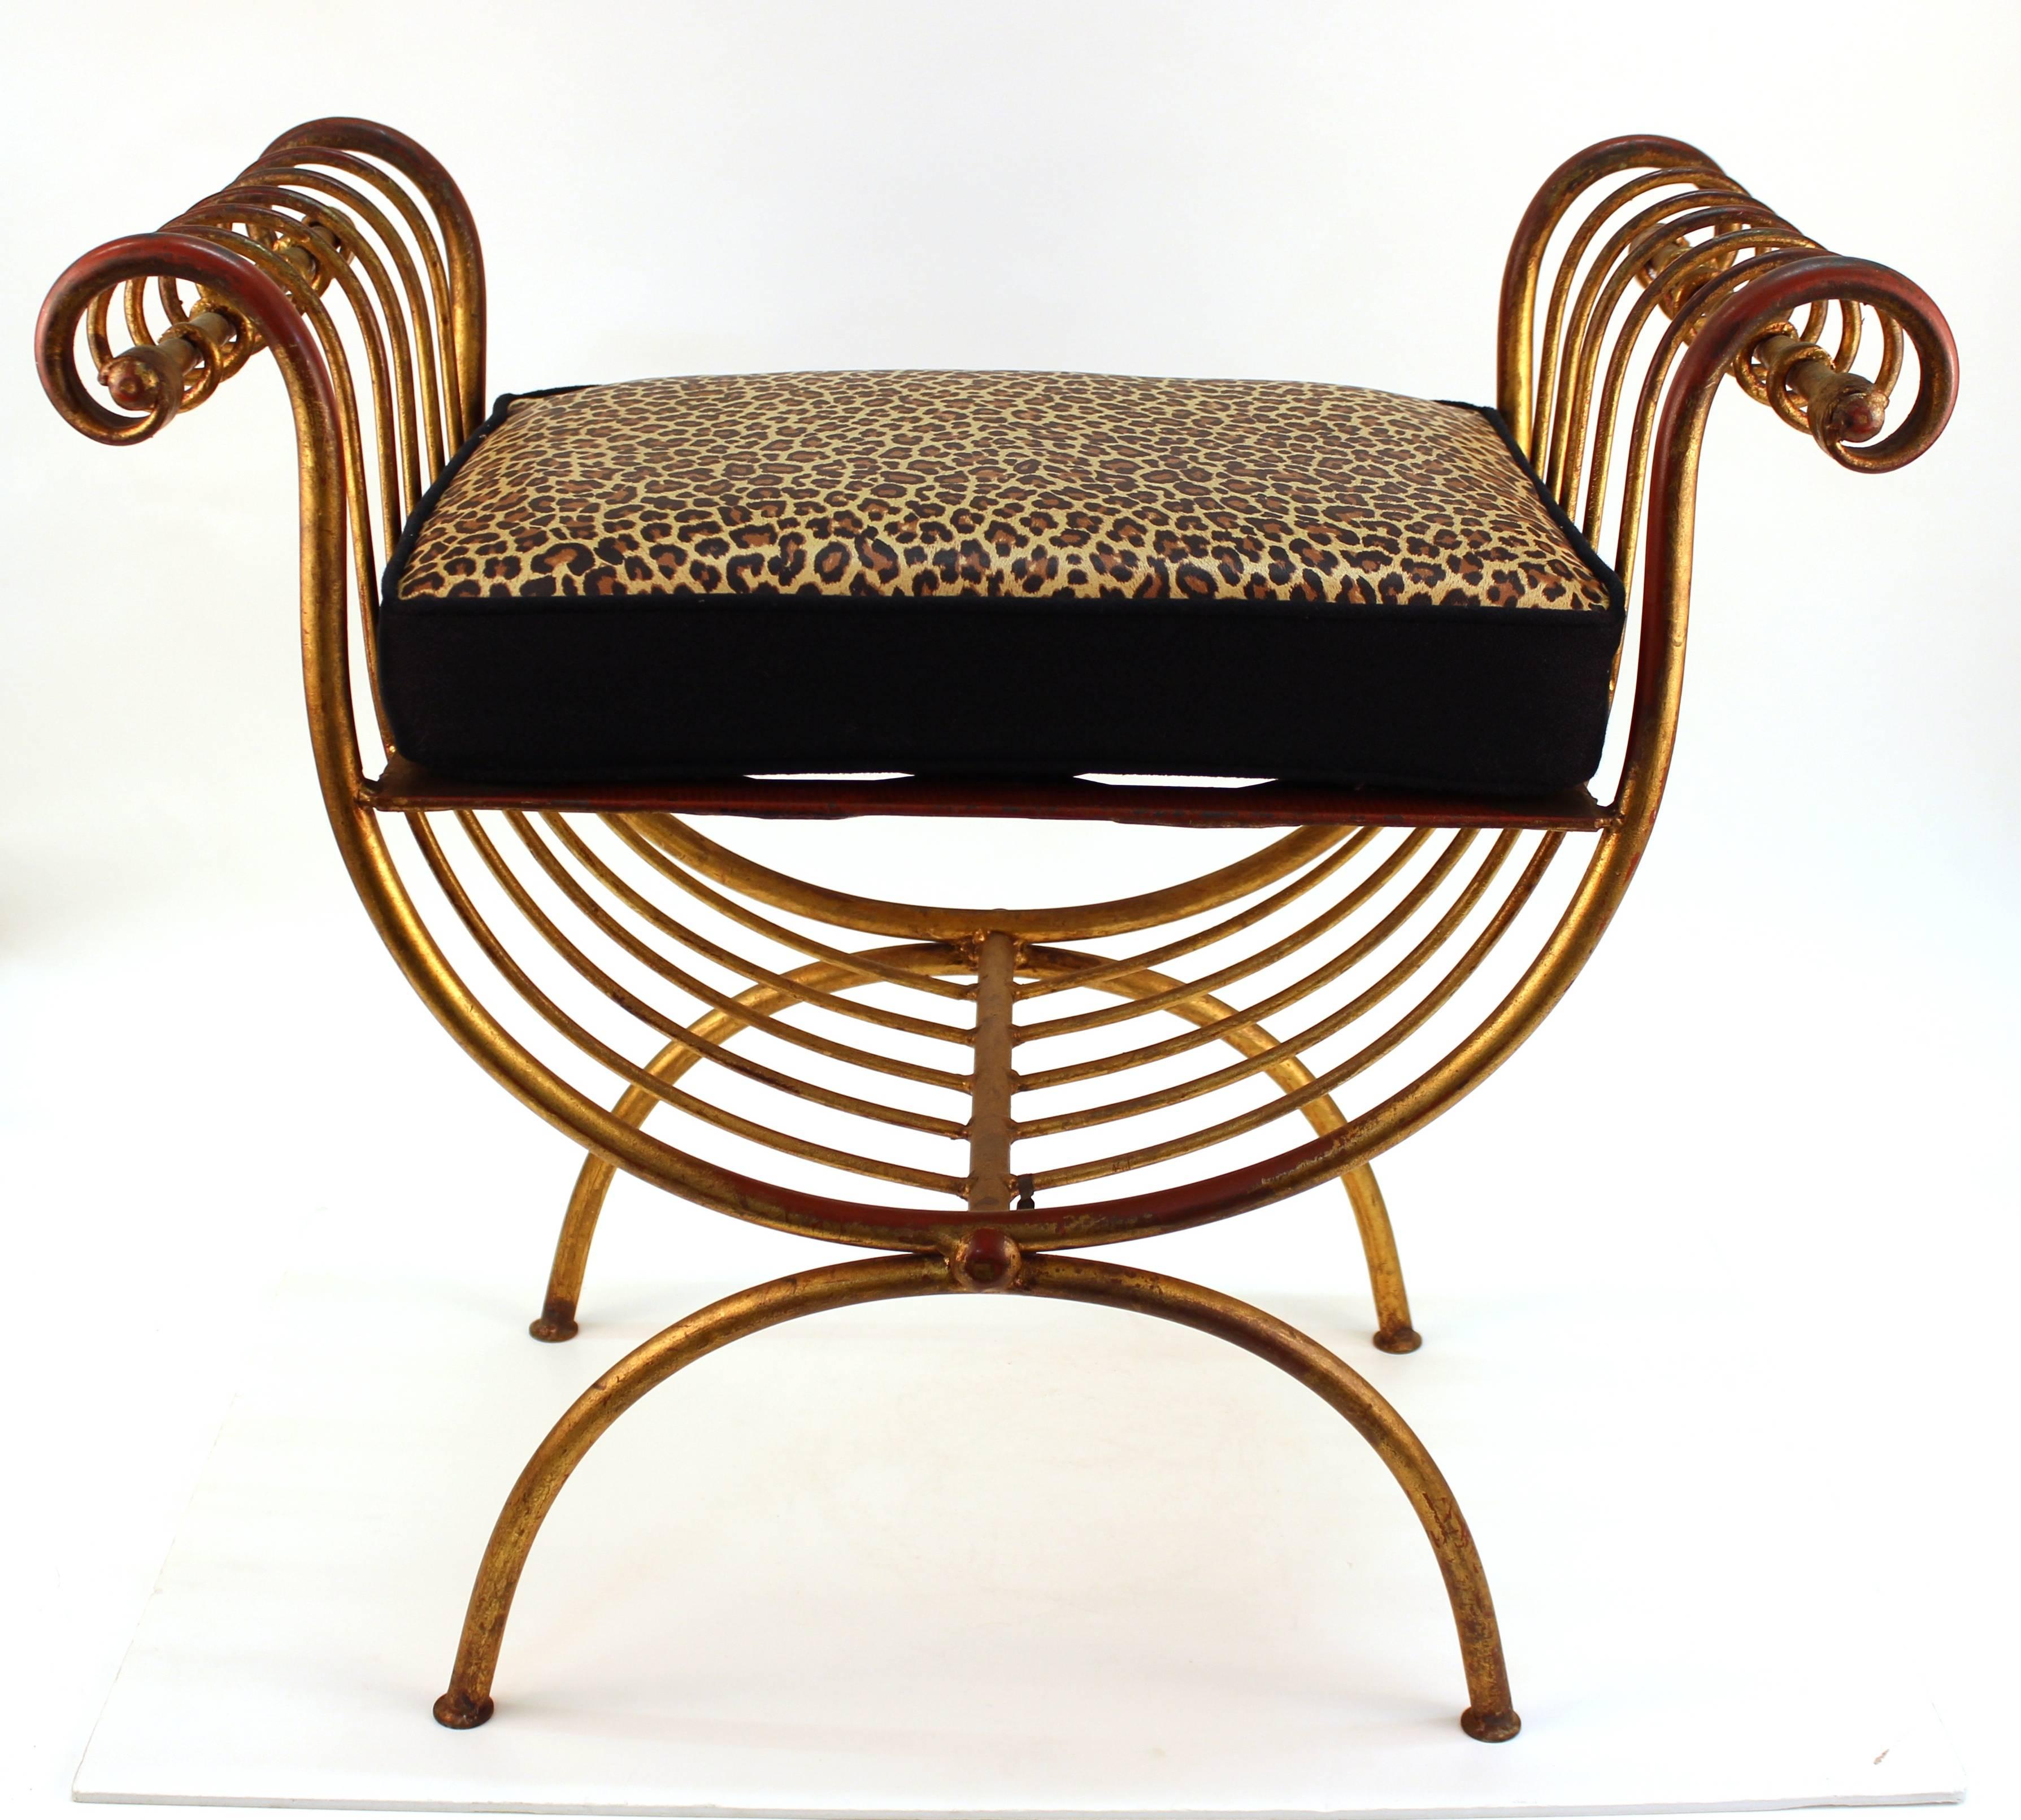 Mid-20th Century Hollywood Regency Italian Gilded Wrought Iron Benches in Leopard Print Leather